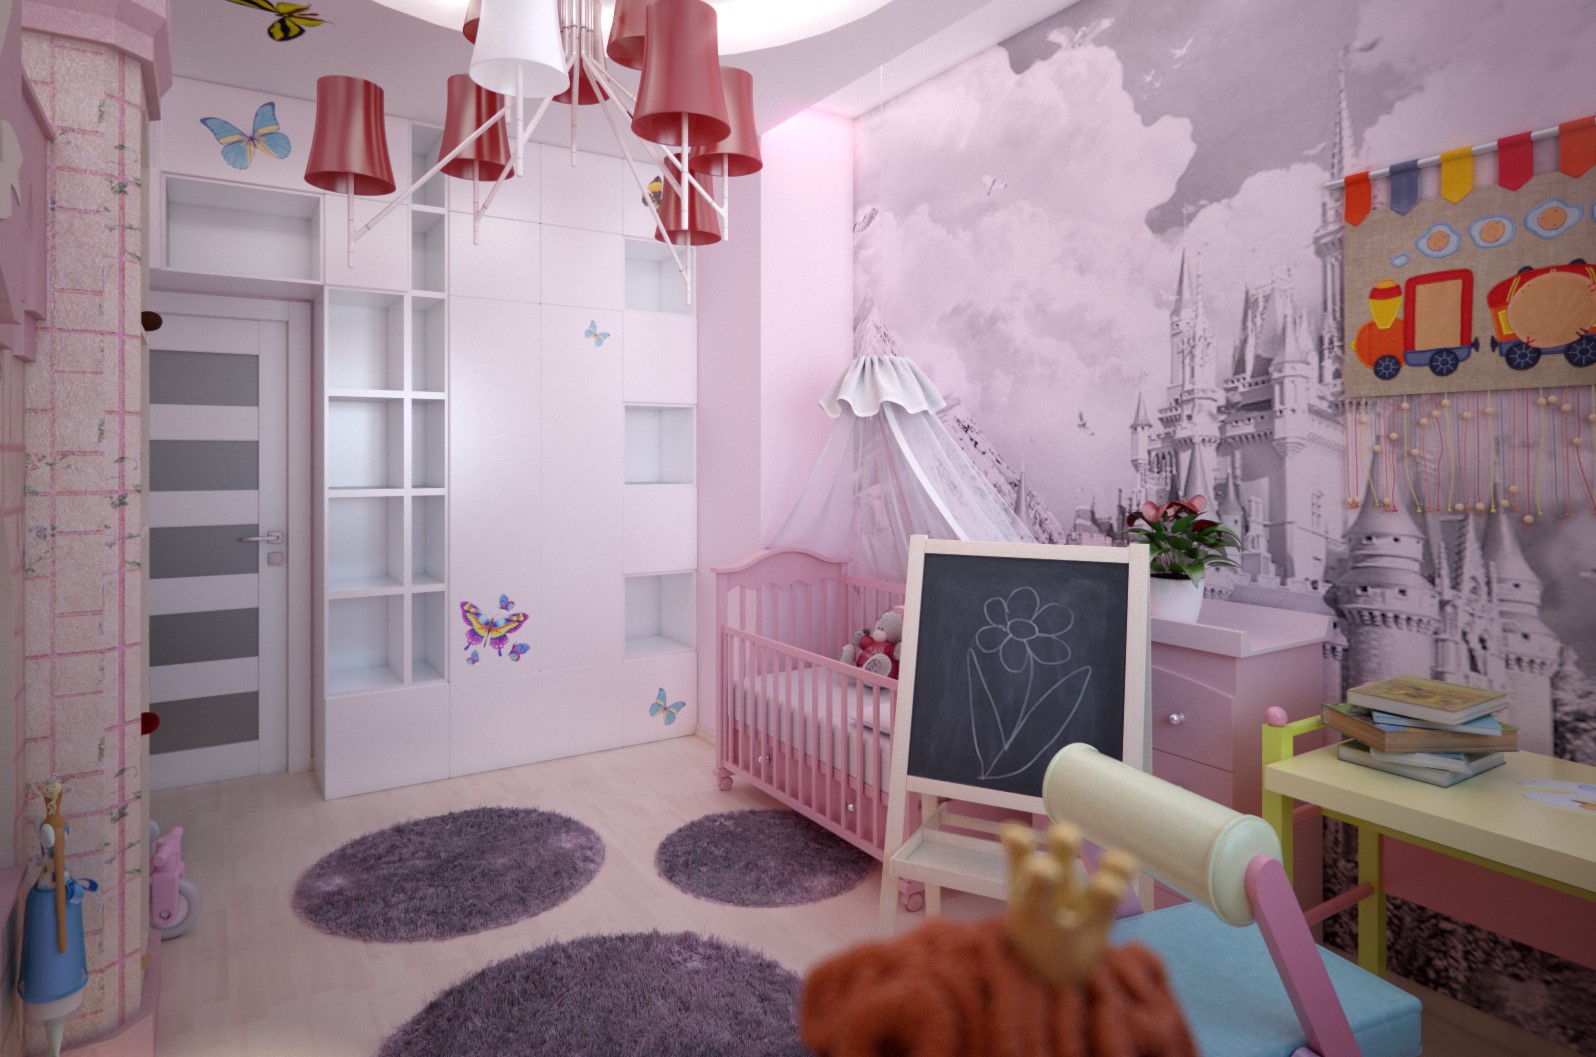 variant of a bright modern interior of a children's room